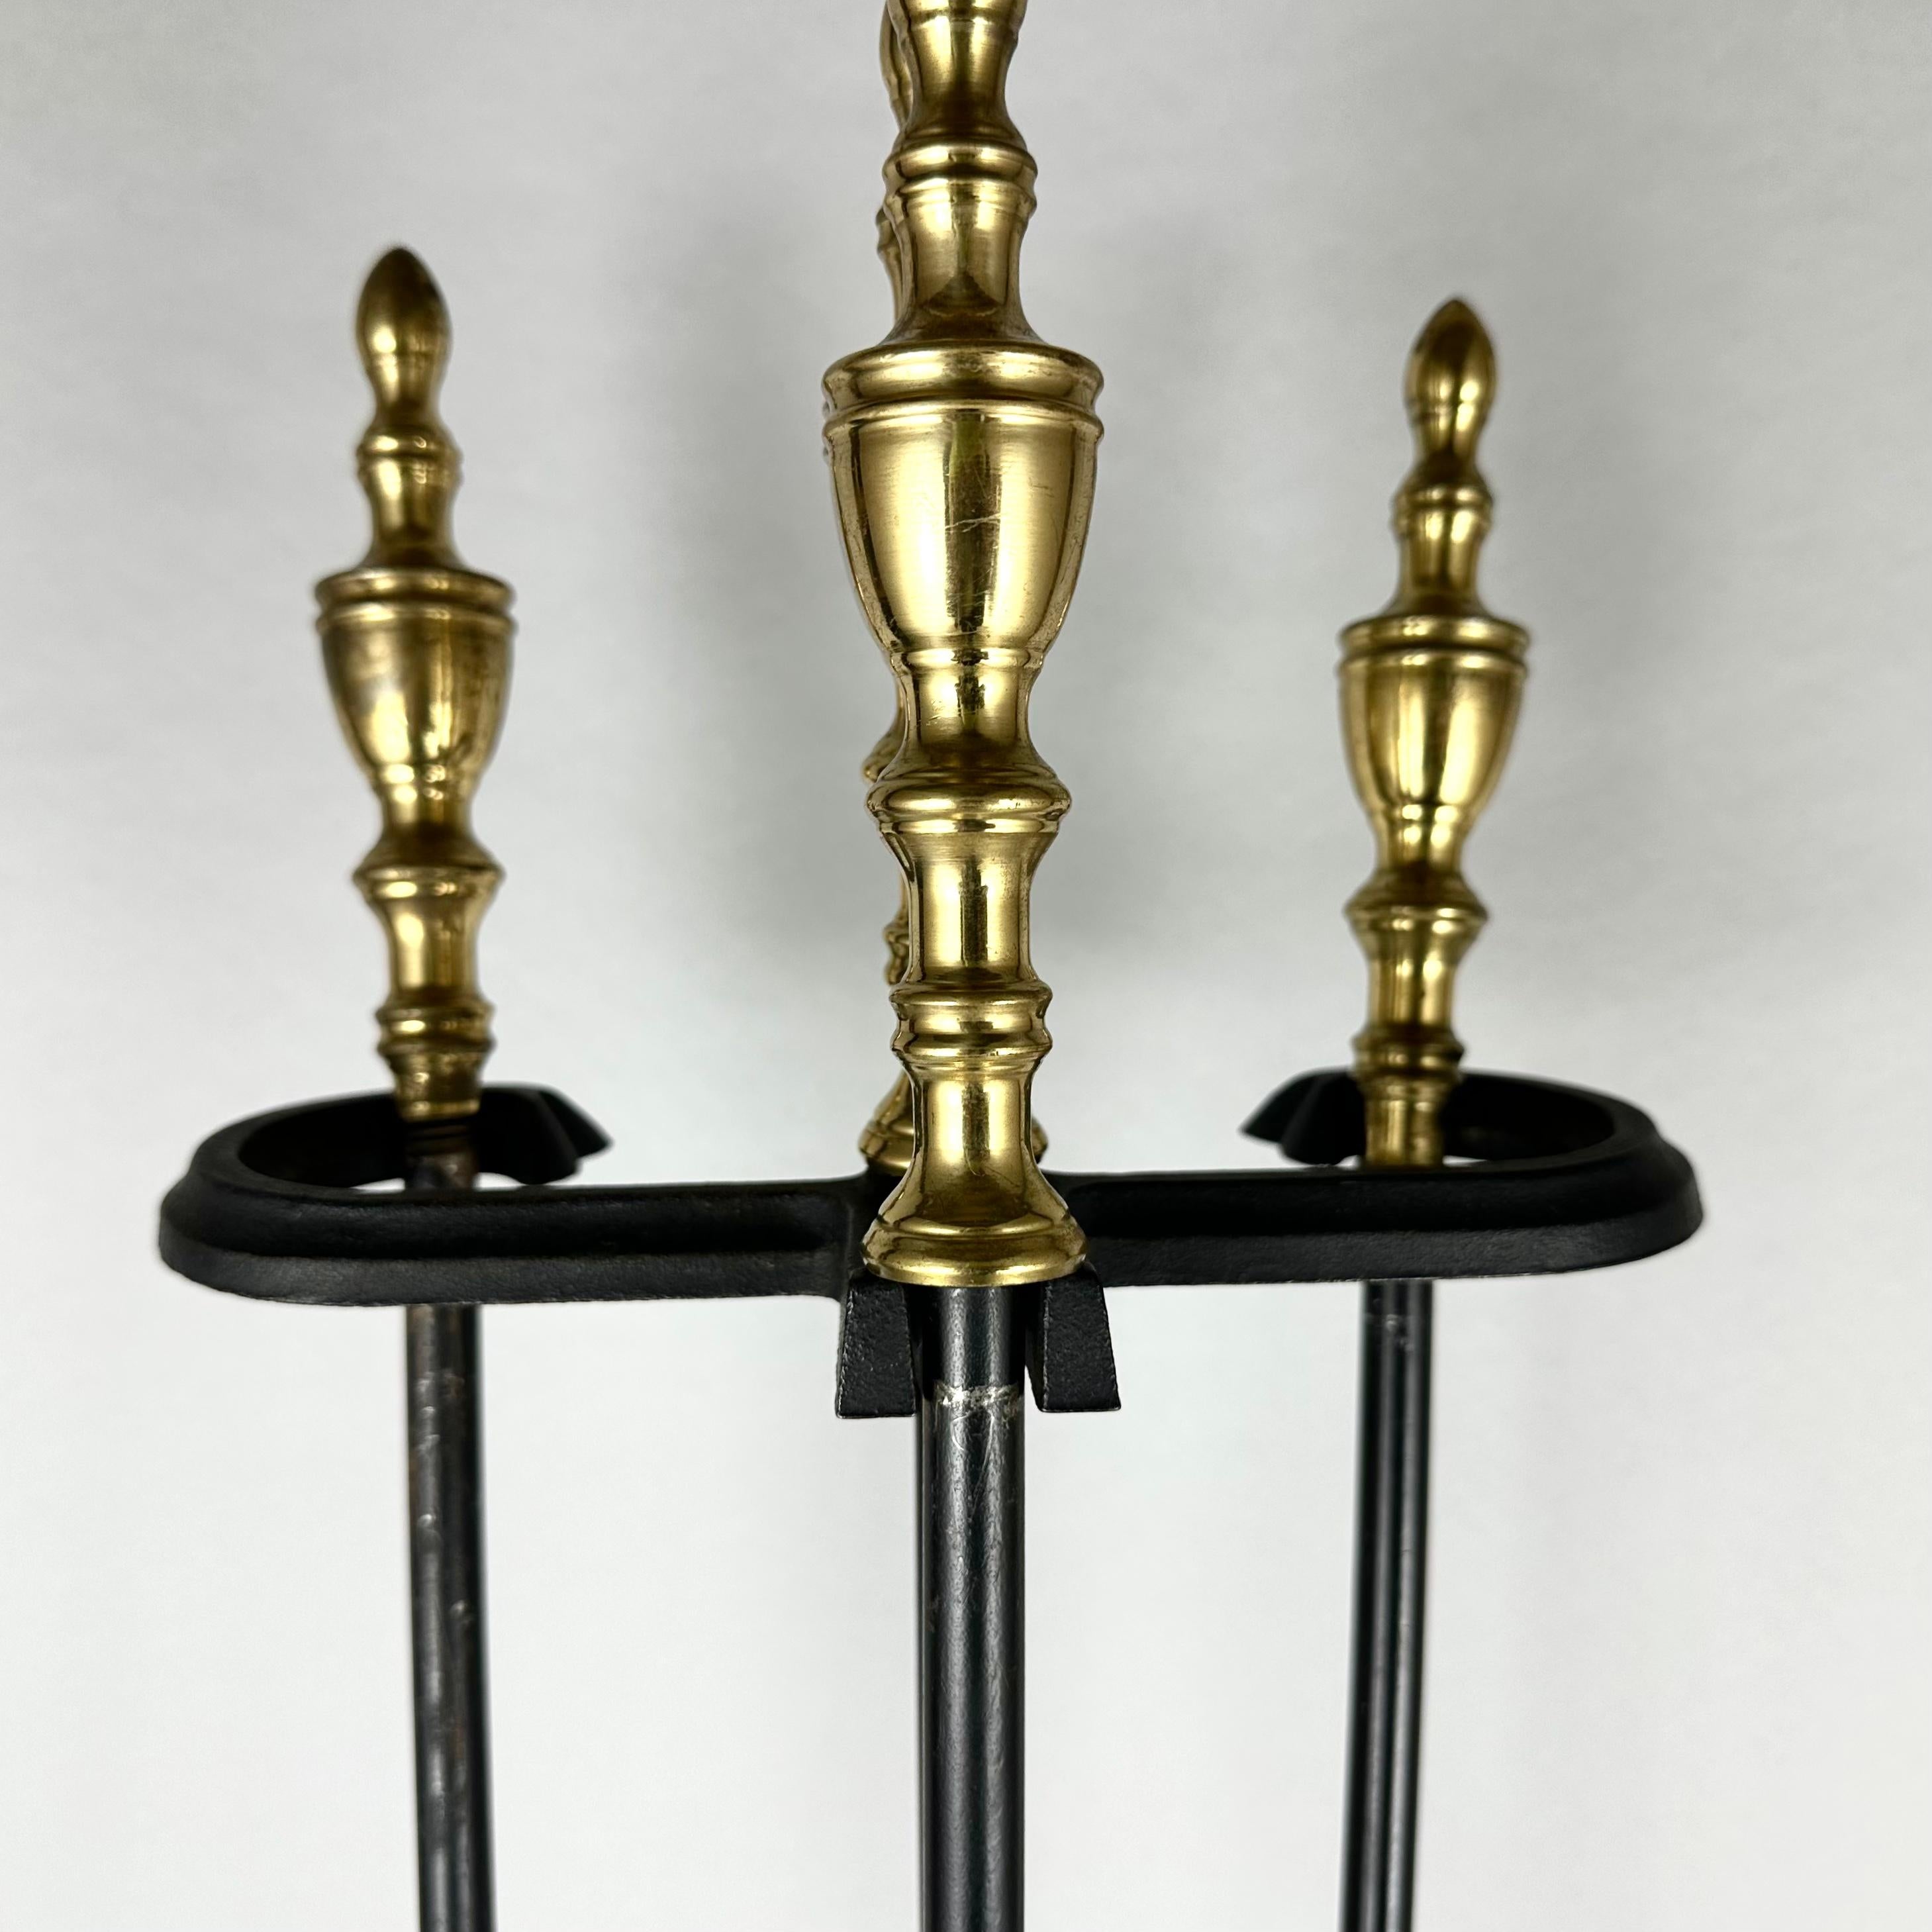 German Antique Set Of 4-Piece Cast Iron Brass Fireplace Accessories And Forged St For Sale